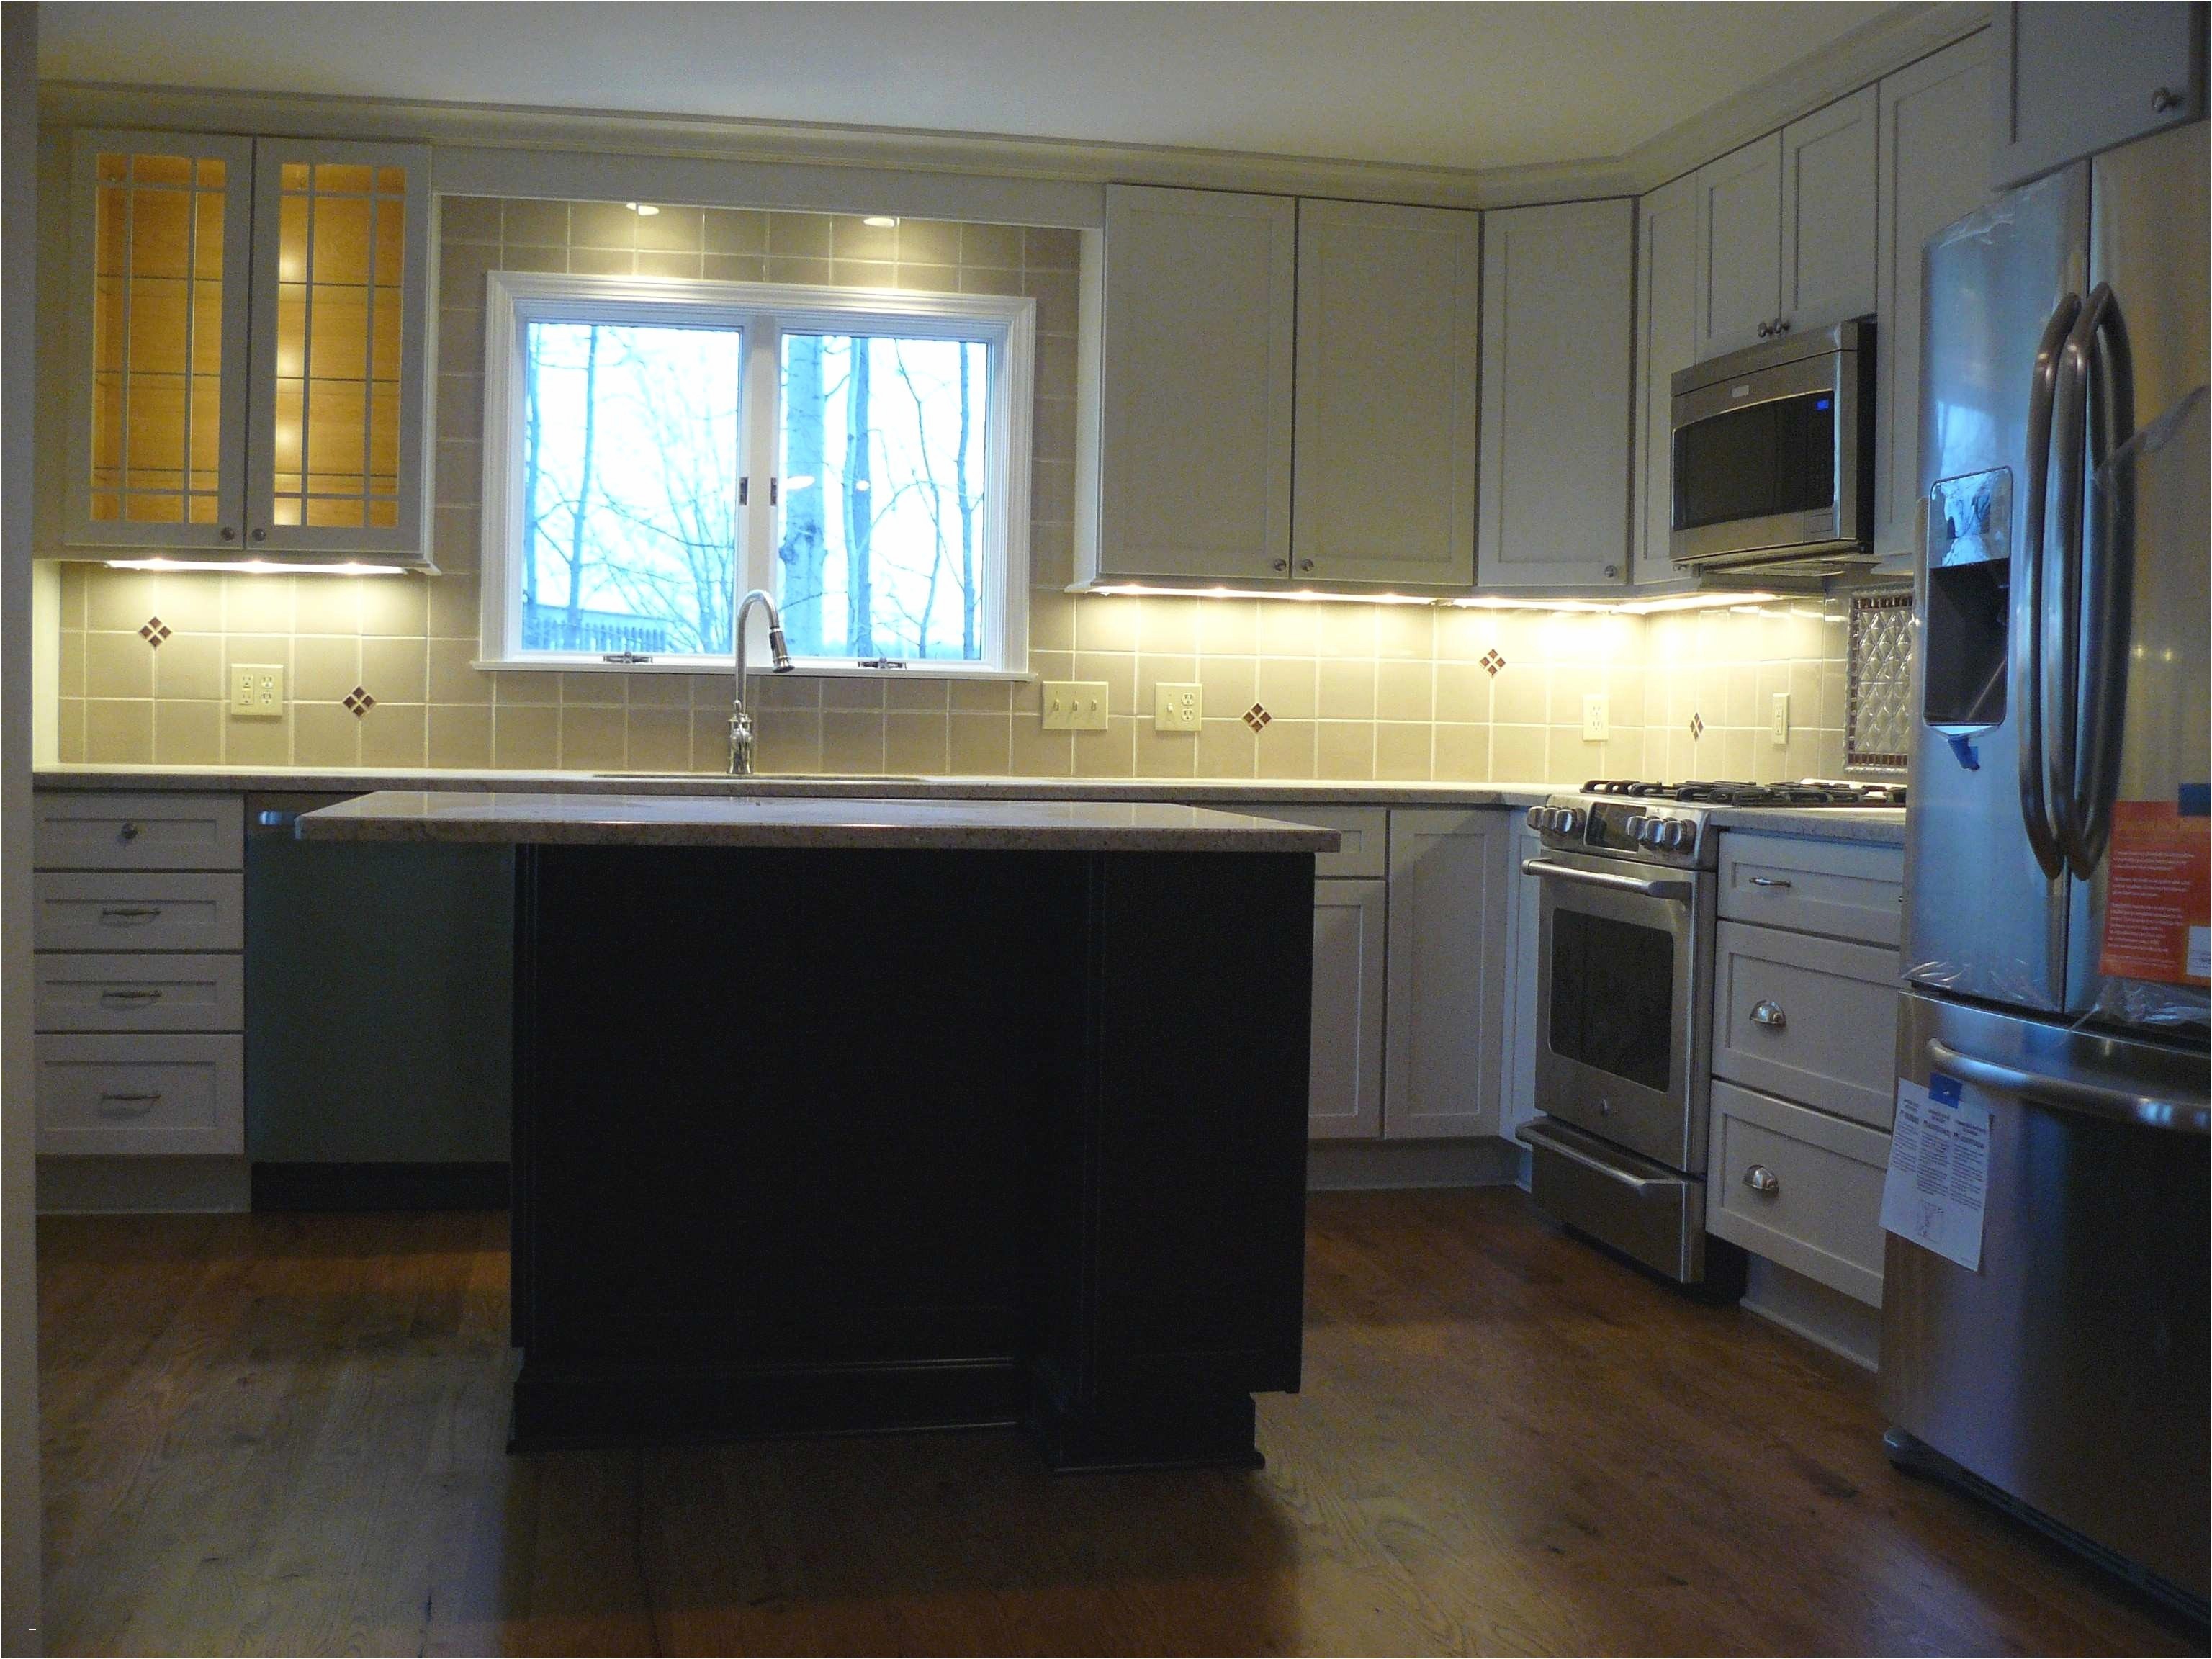 Brookhaven Cabinets Replacement Parts Wood Kitchen Cabinets Best Of 25 Elegant Brookhaven Kitchen Cabinets Of Brookhaven Cabinets Replacement Parts 